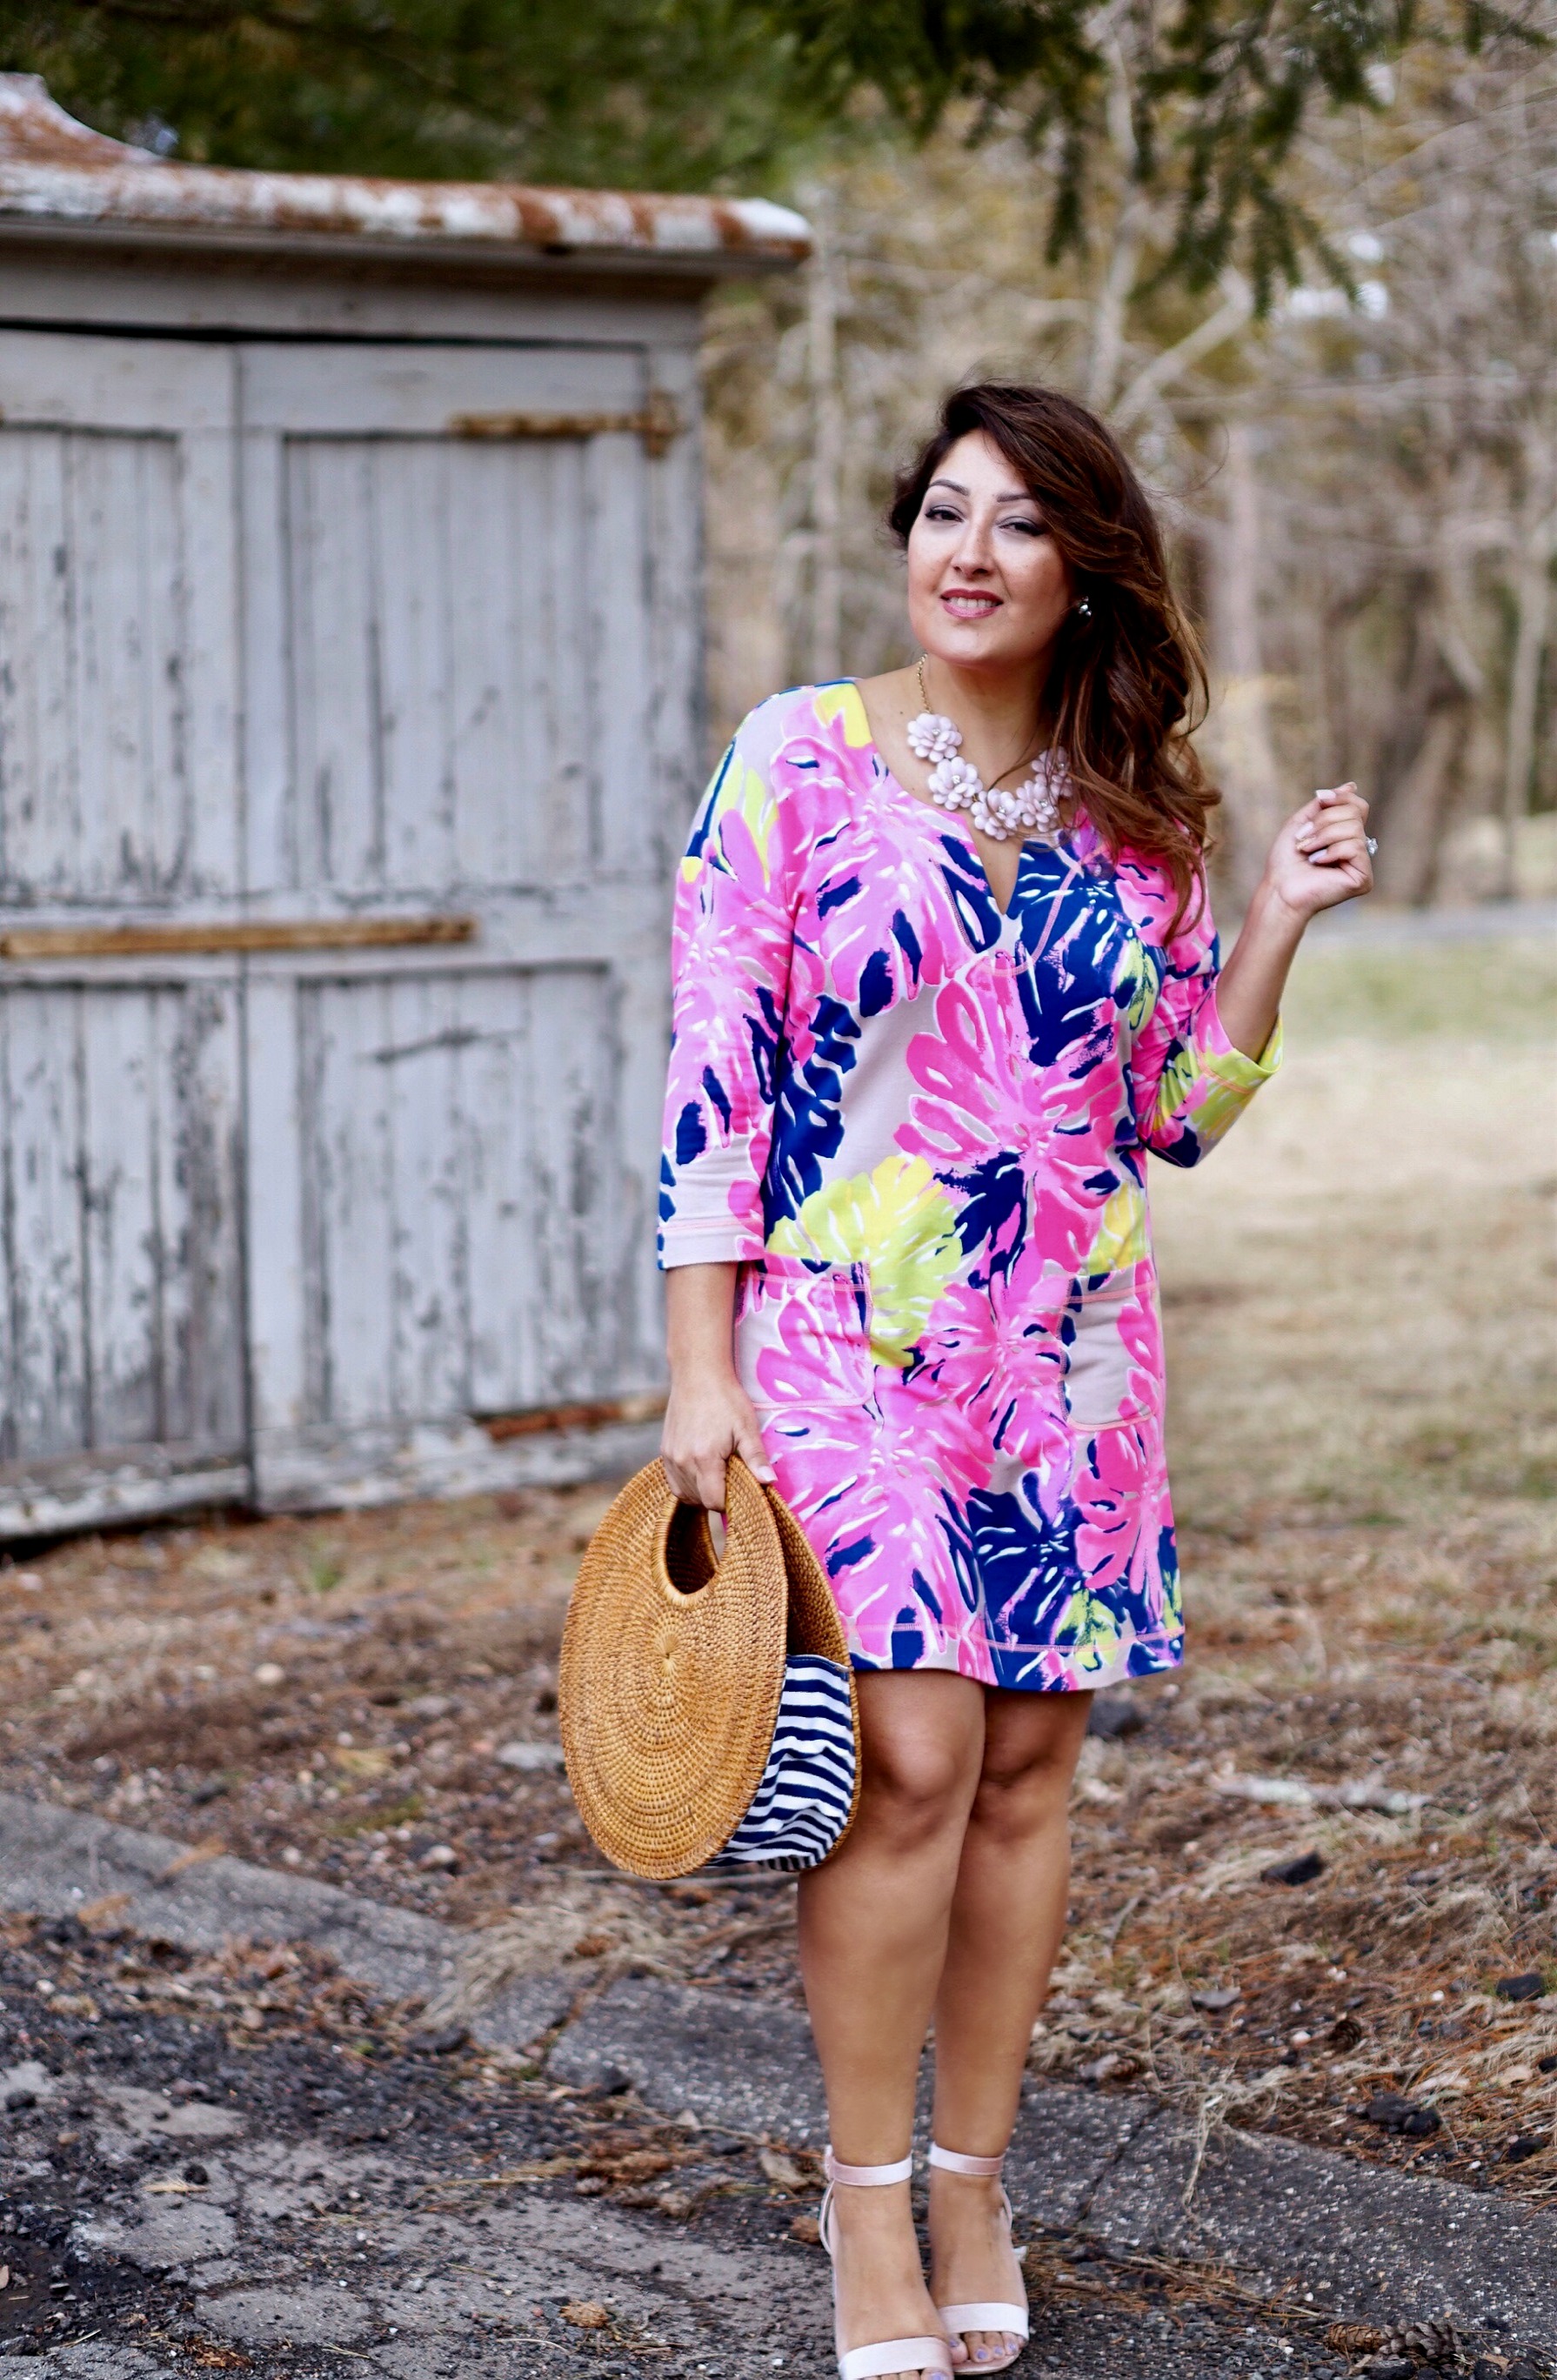 One of the most comfortable @lillypulitzer dresses ever!